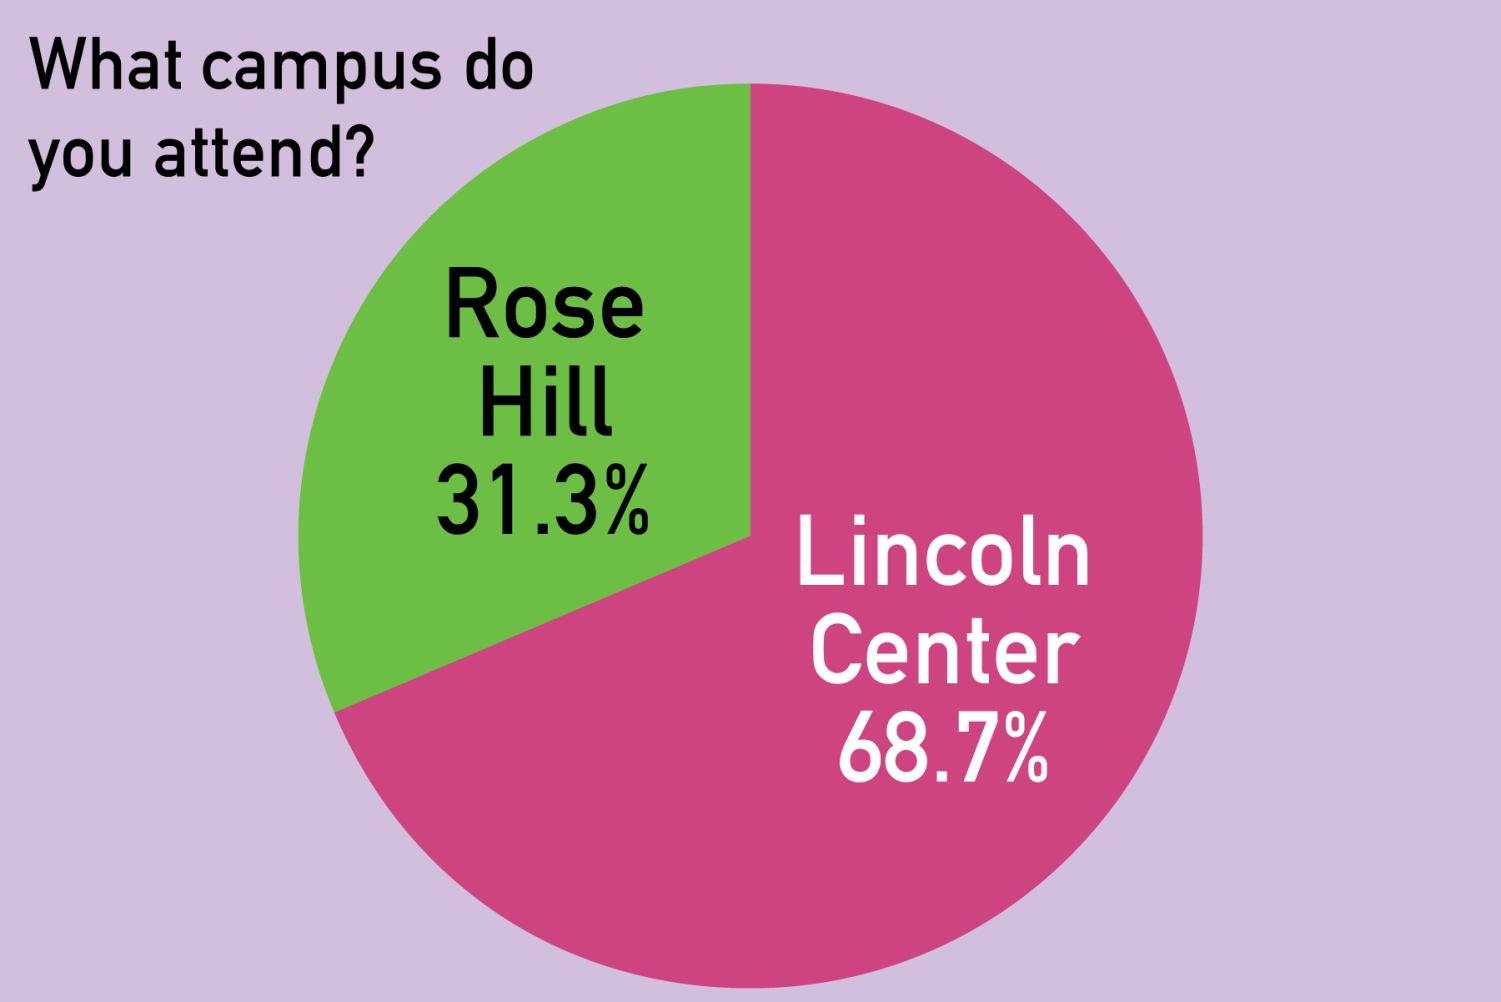 graphic showing rose hill 31.3% and lincoln center 68.7% campus